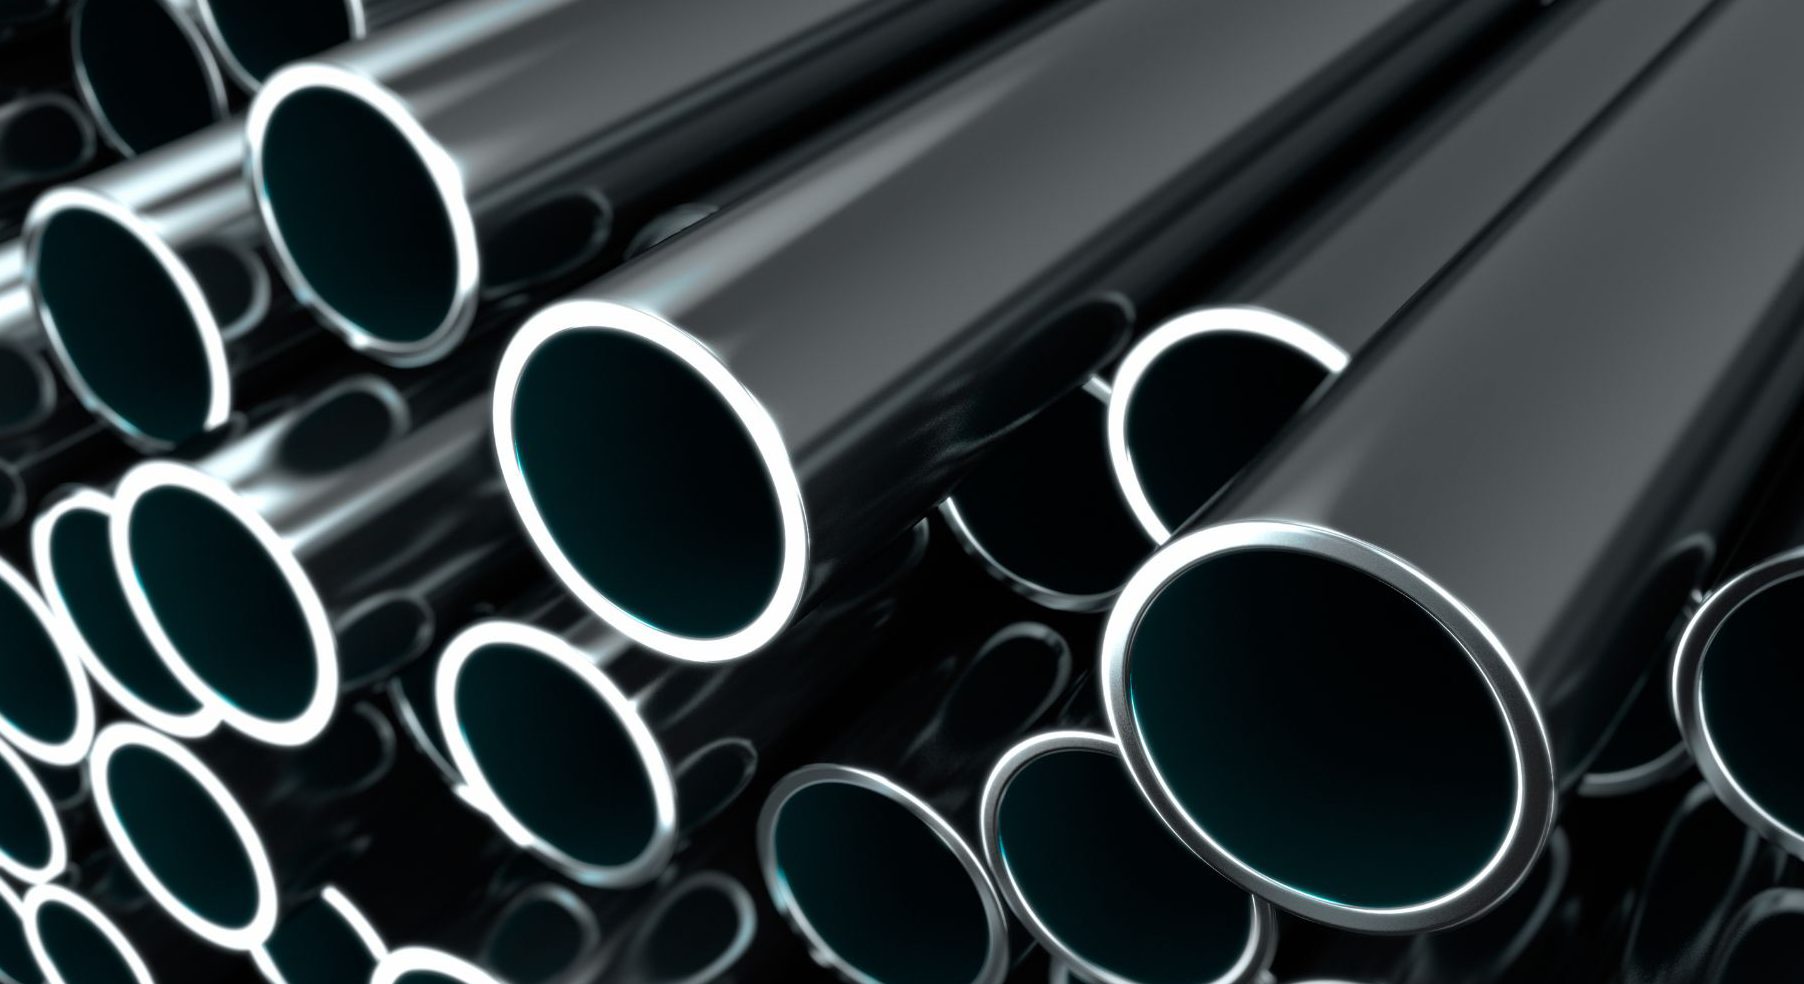 Global Collapsible Metal Tubes Market Growth Analysis And Indications – Includes Collapsible Metal Tubes Industry